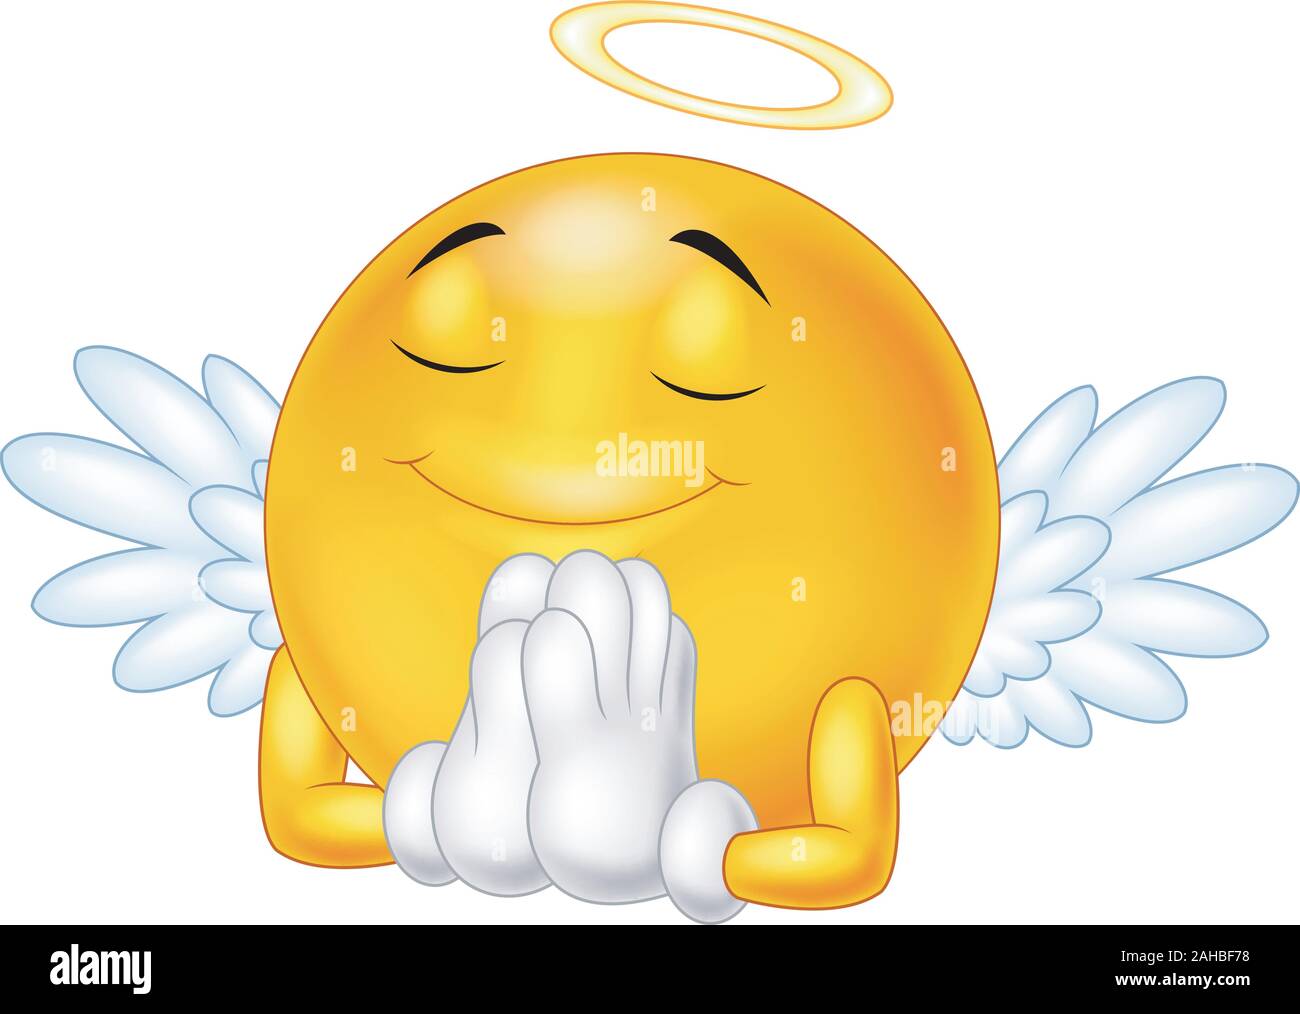 Angel emoticon isolated on white background Stock Vector